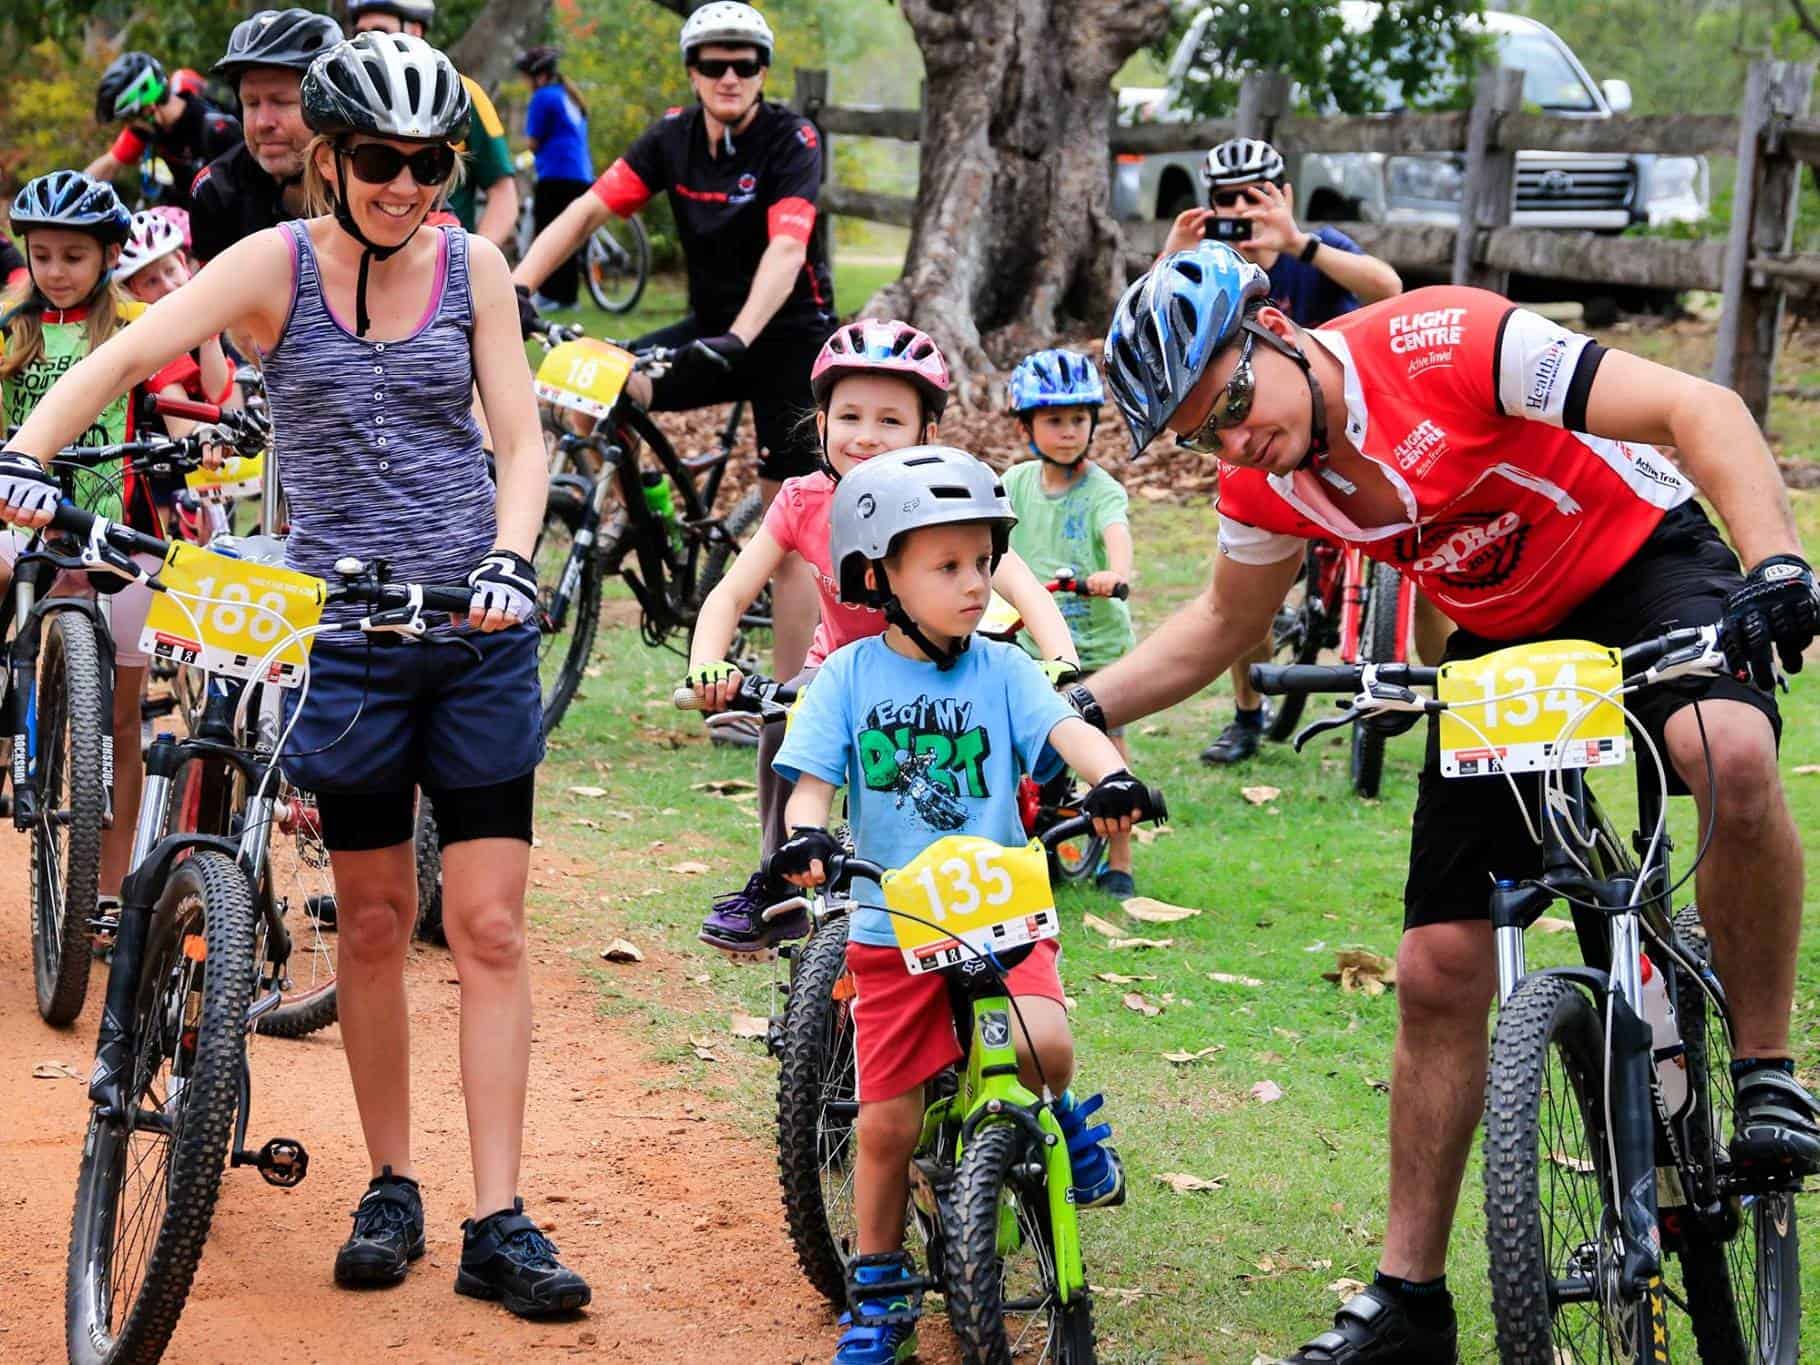 City of Ipswich FREE Family Fun Ride | Cycle Epic 2016